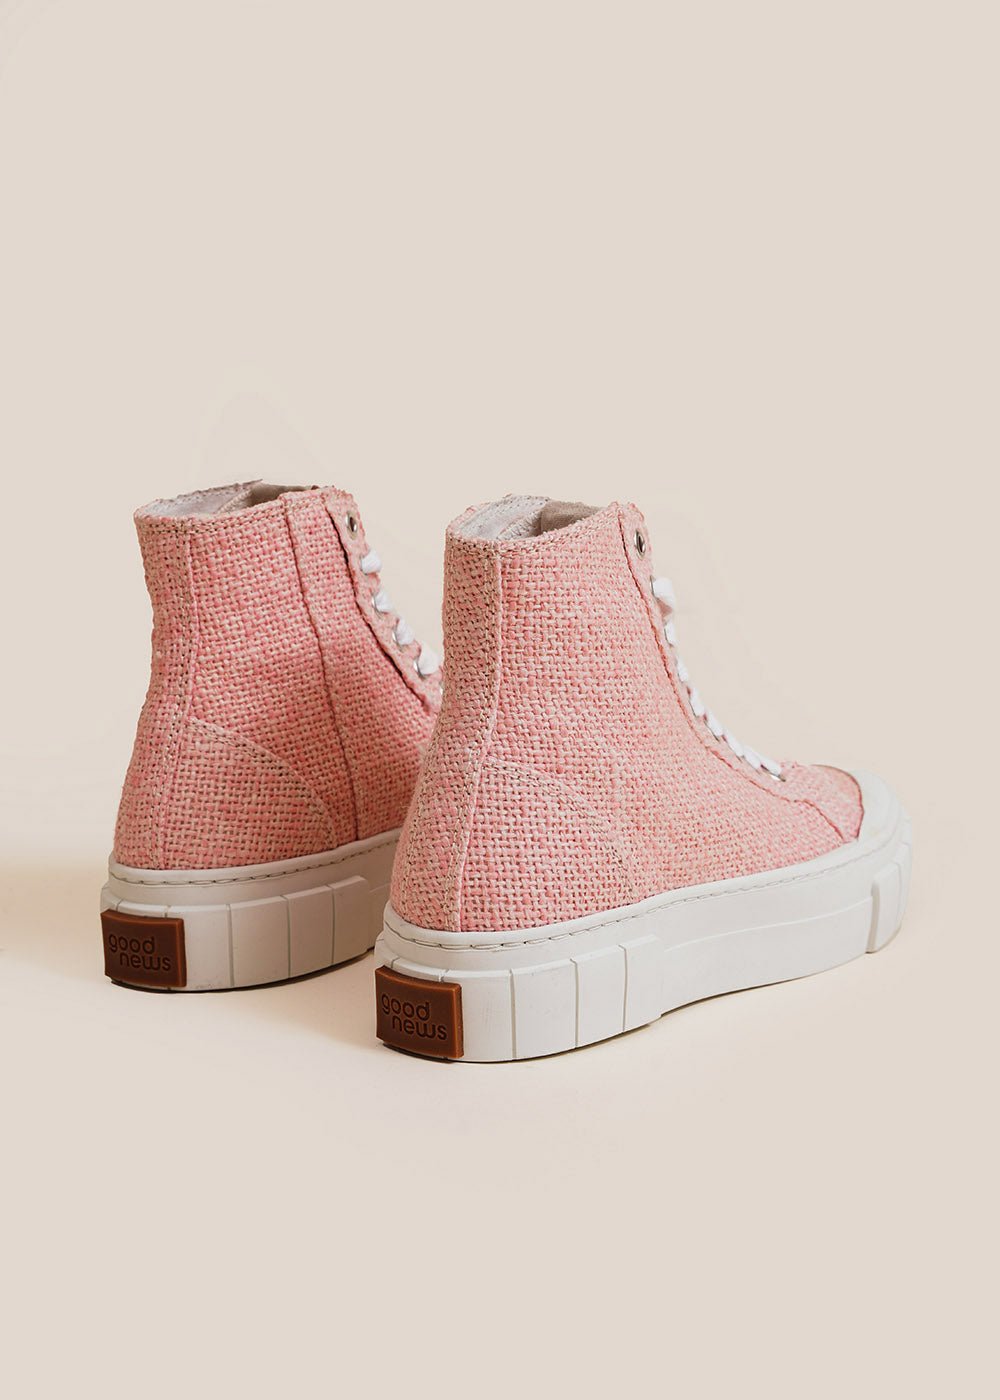 GOOD NEWS Pink Juice Sneakers - New Classics Studios Sustainable Ethical Fashion Canada